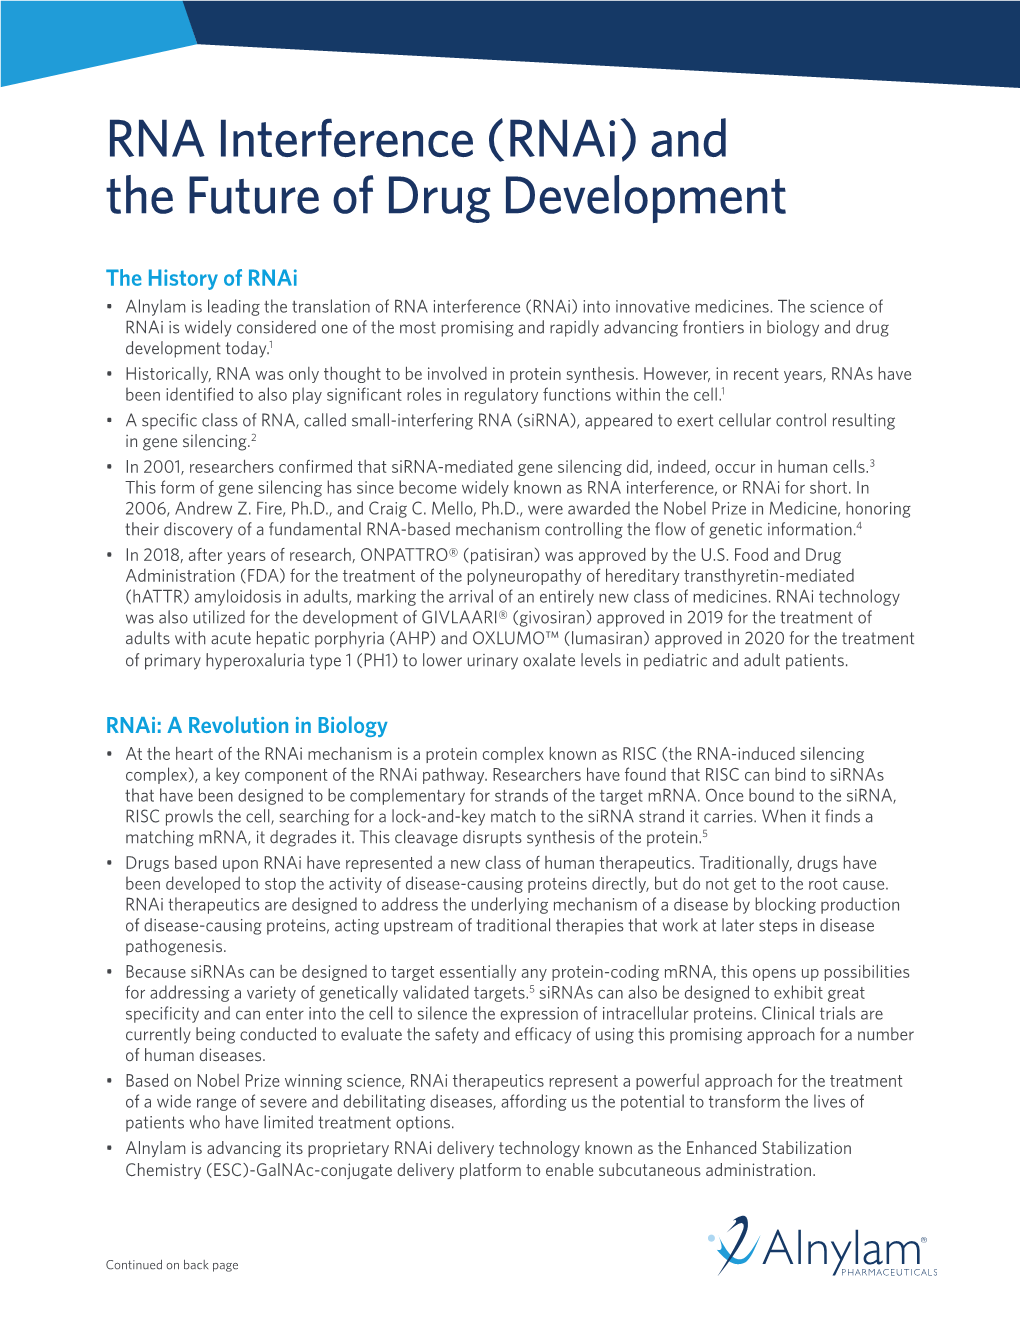 RNA Interference (Rnai) and the Future of Drug Development